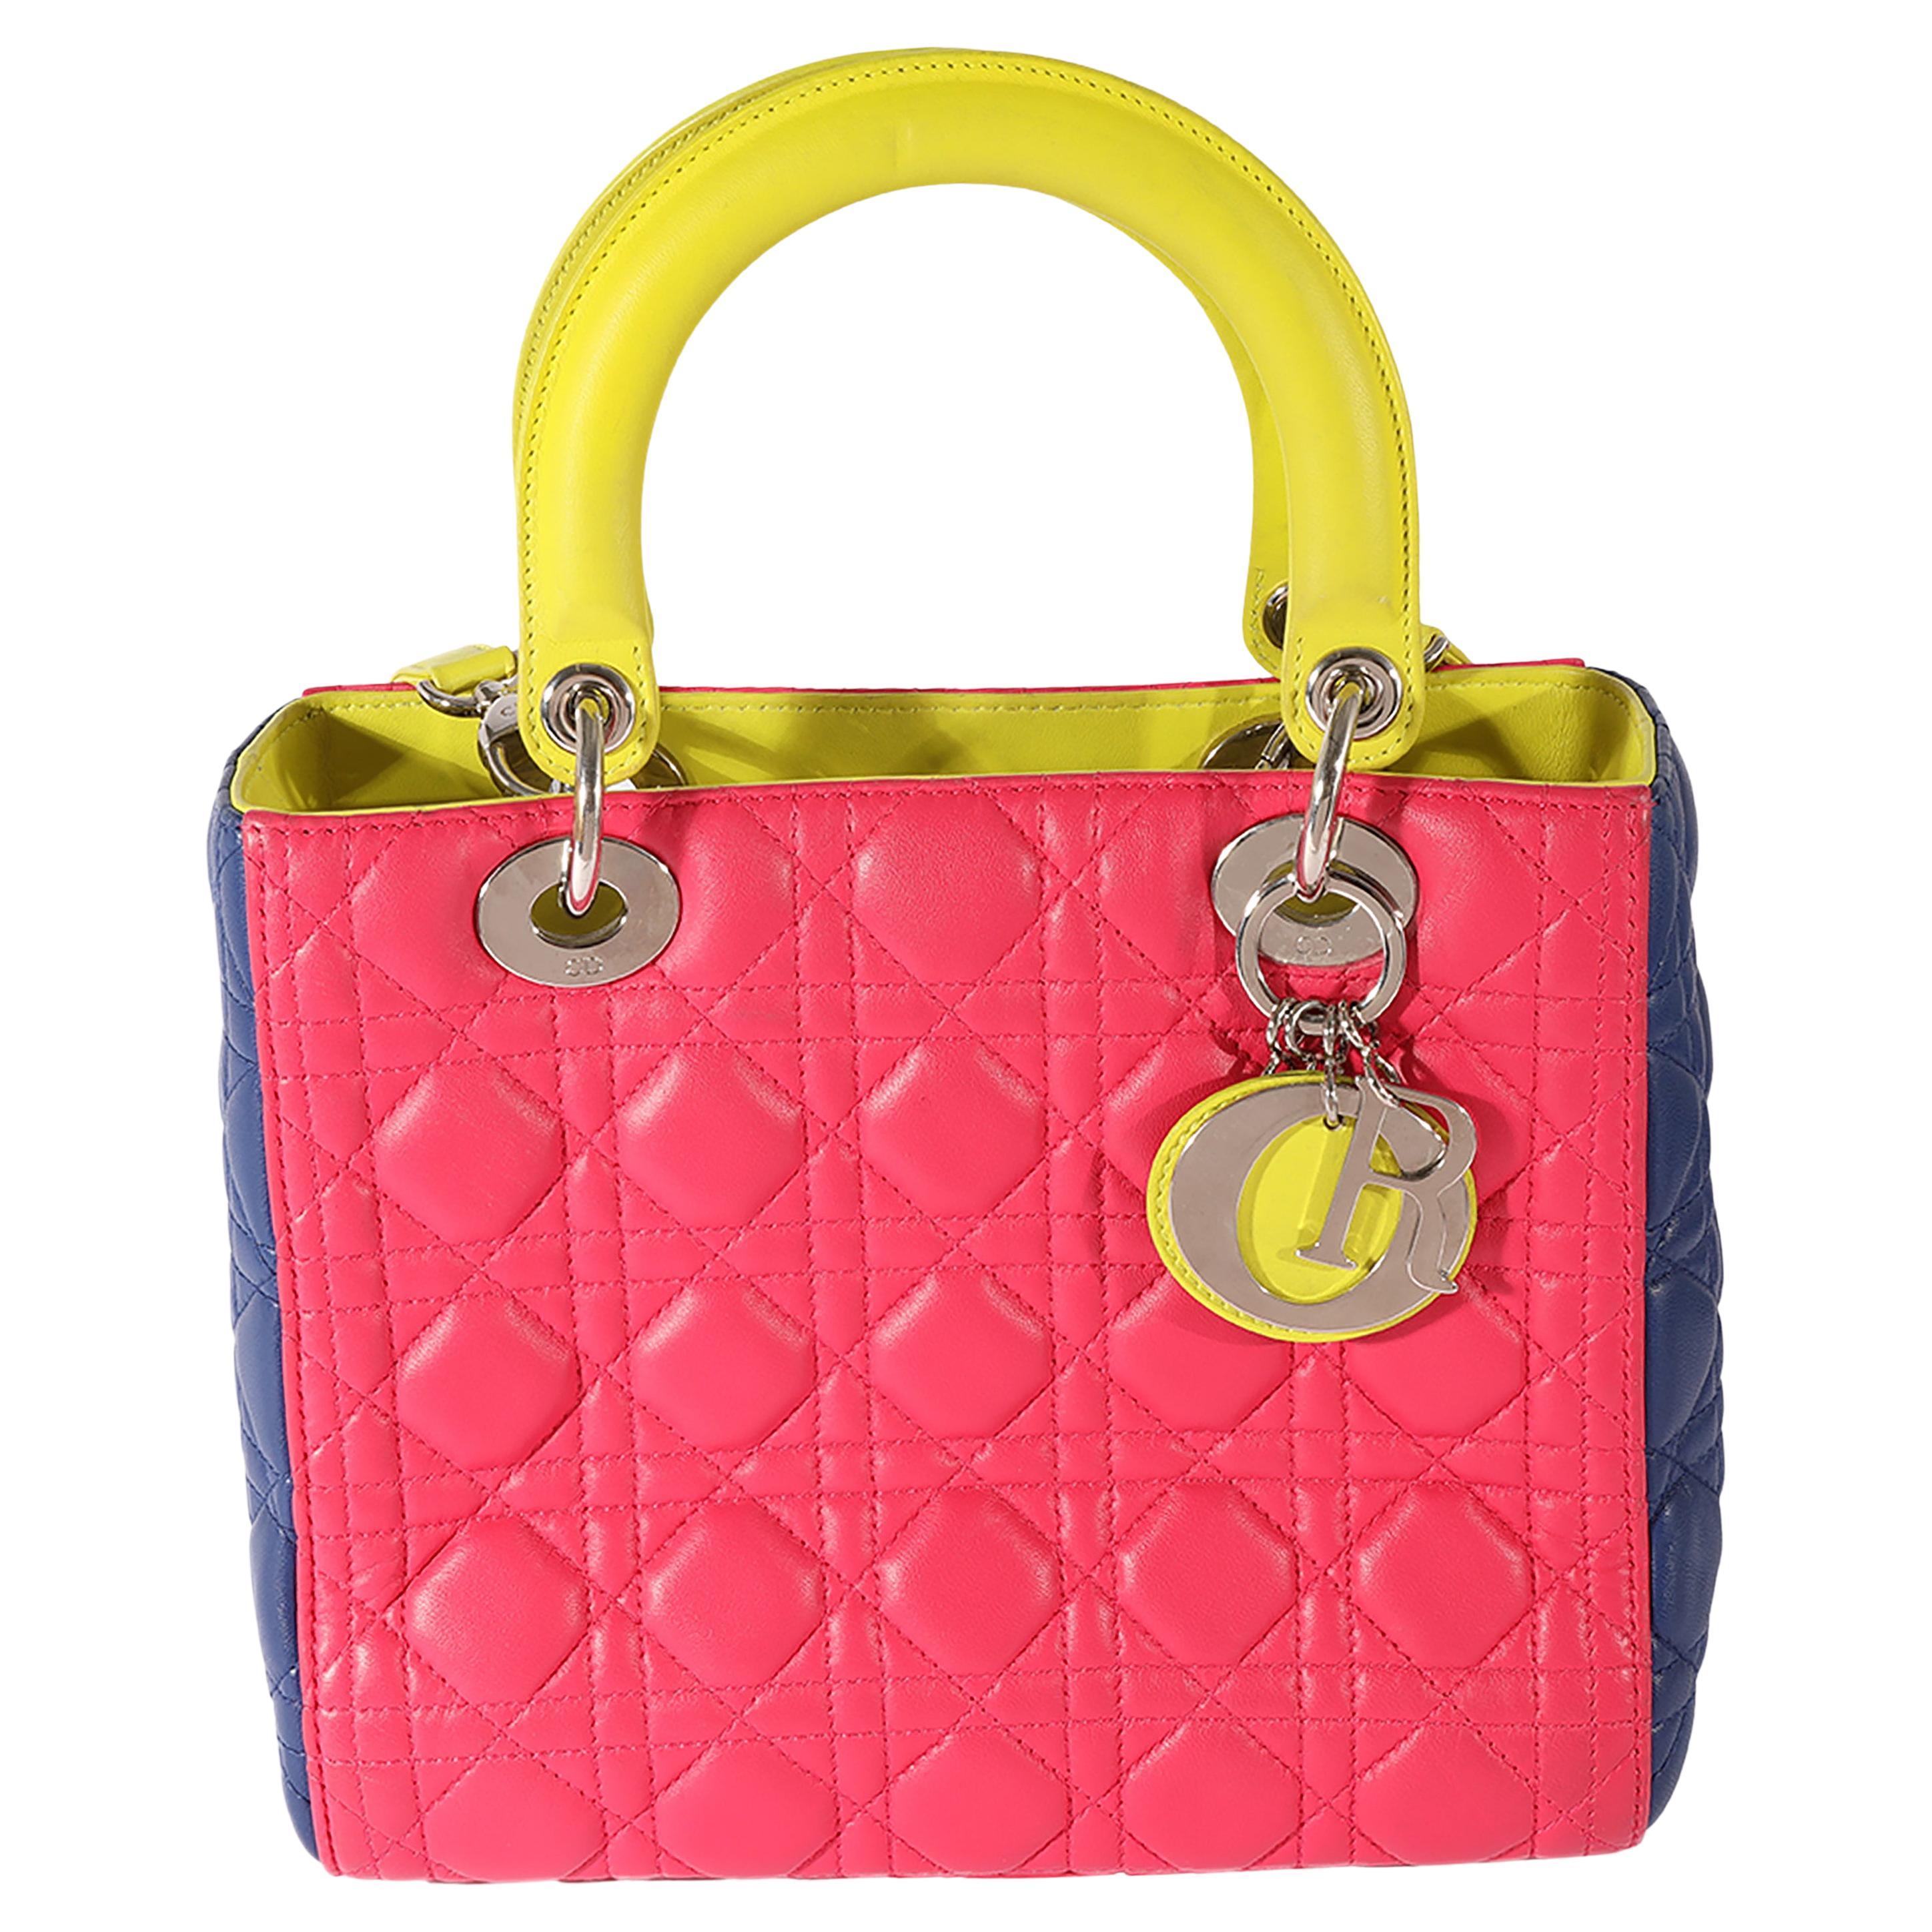 Dior Tricolor Quilted Lambskin Medium Lady Dior Bag For Sale